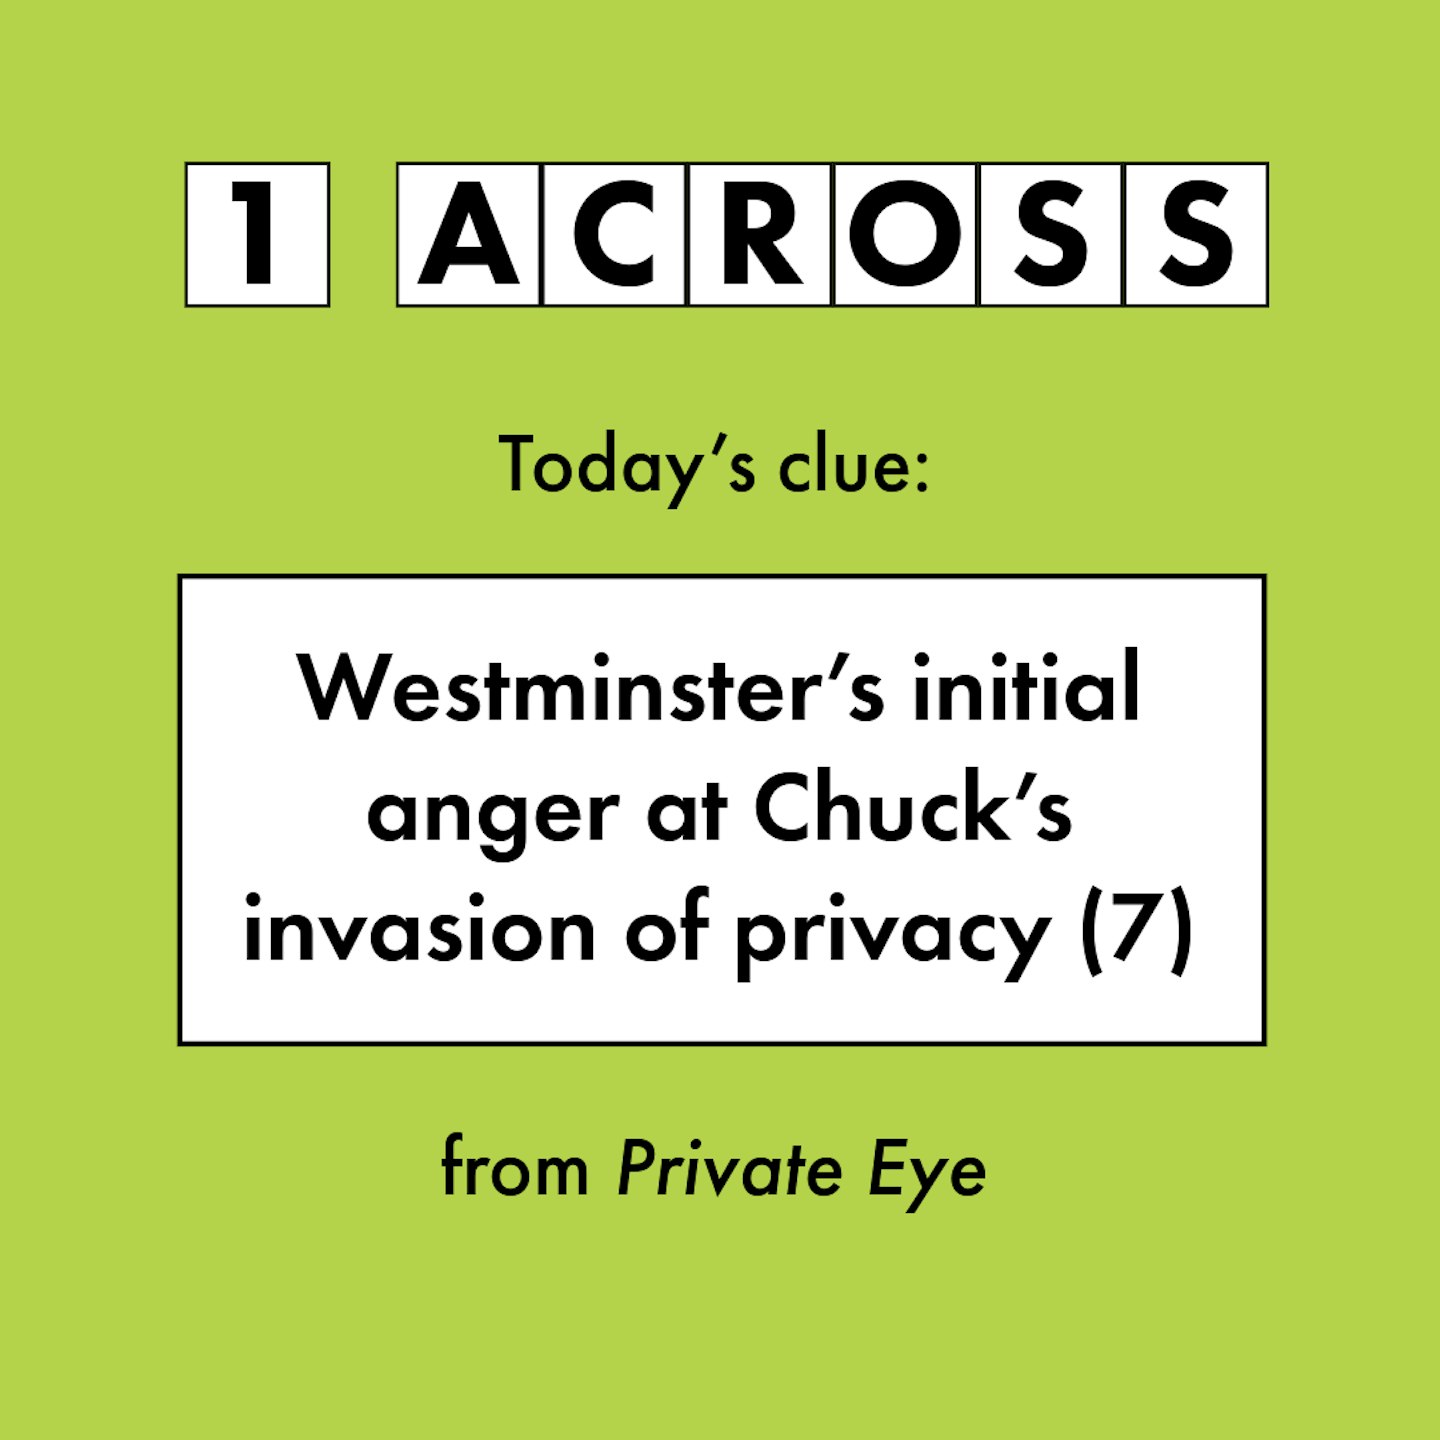 1 Across Westminster’s initial anger at Chuck’s invasion of privacy